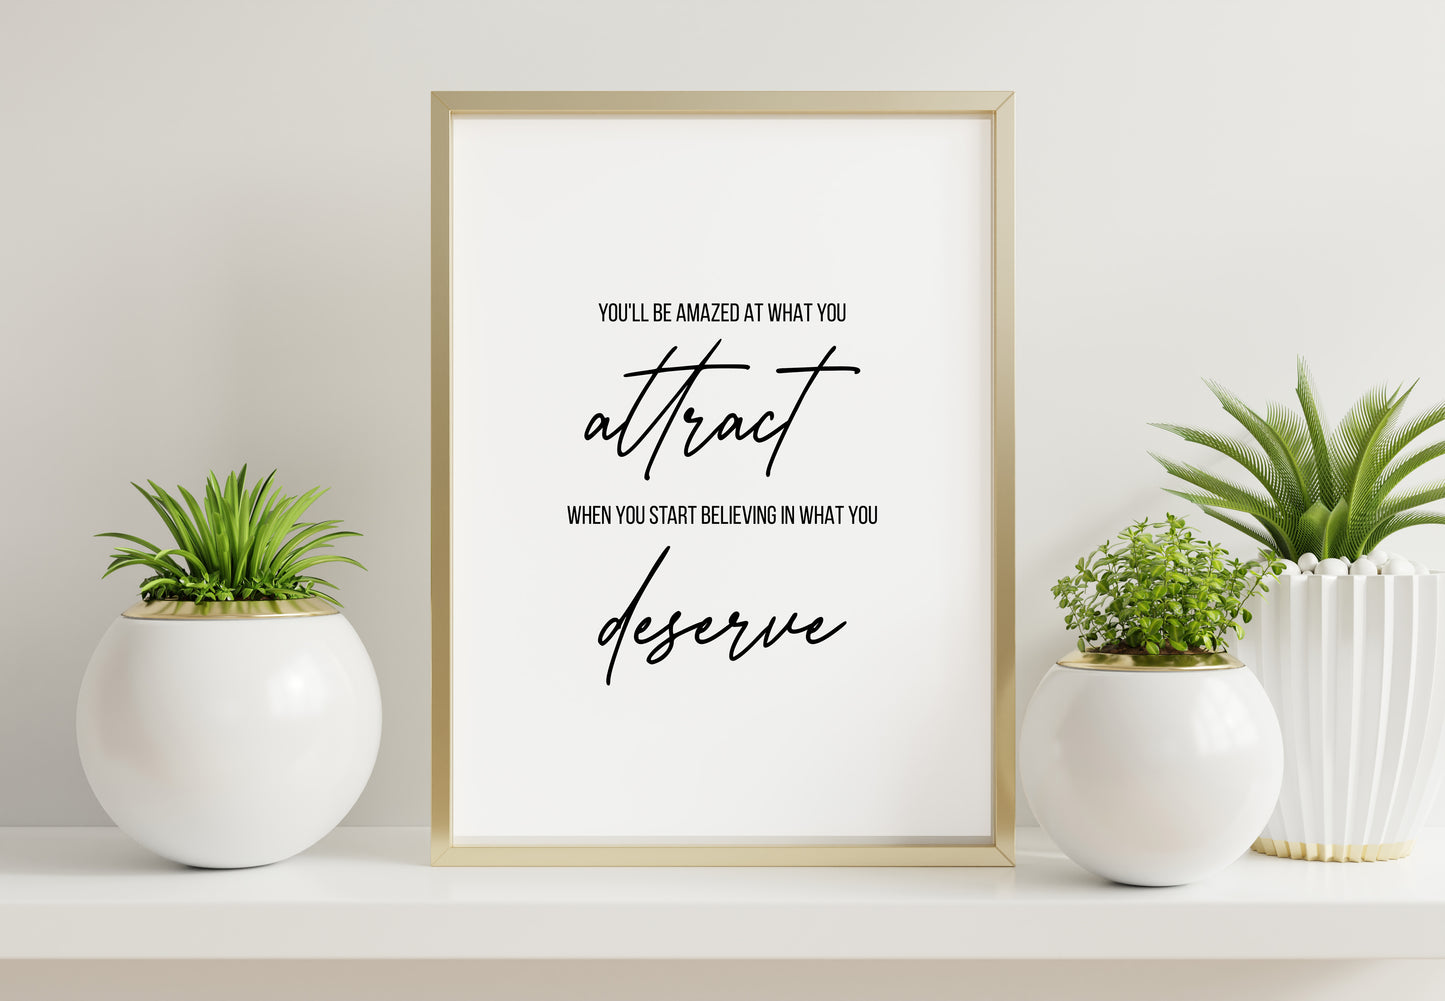 Law of Attraction Quotes, Motivation Poster, Quote Poster, Spiritual Poster